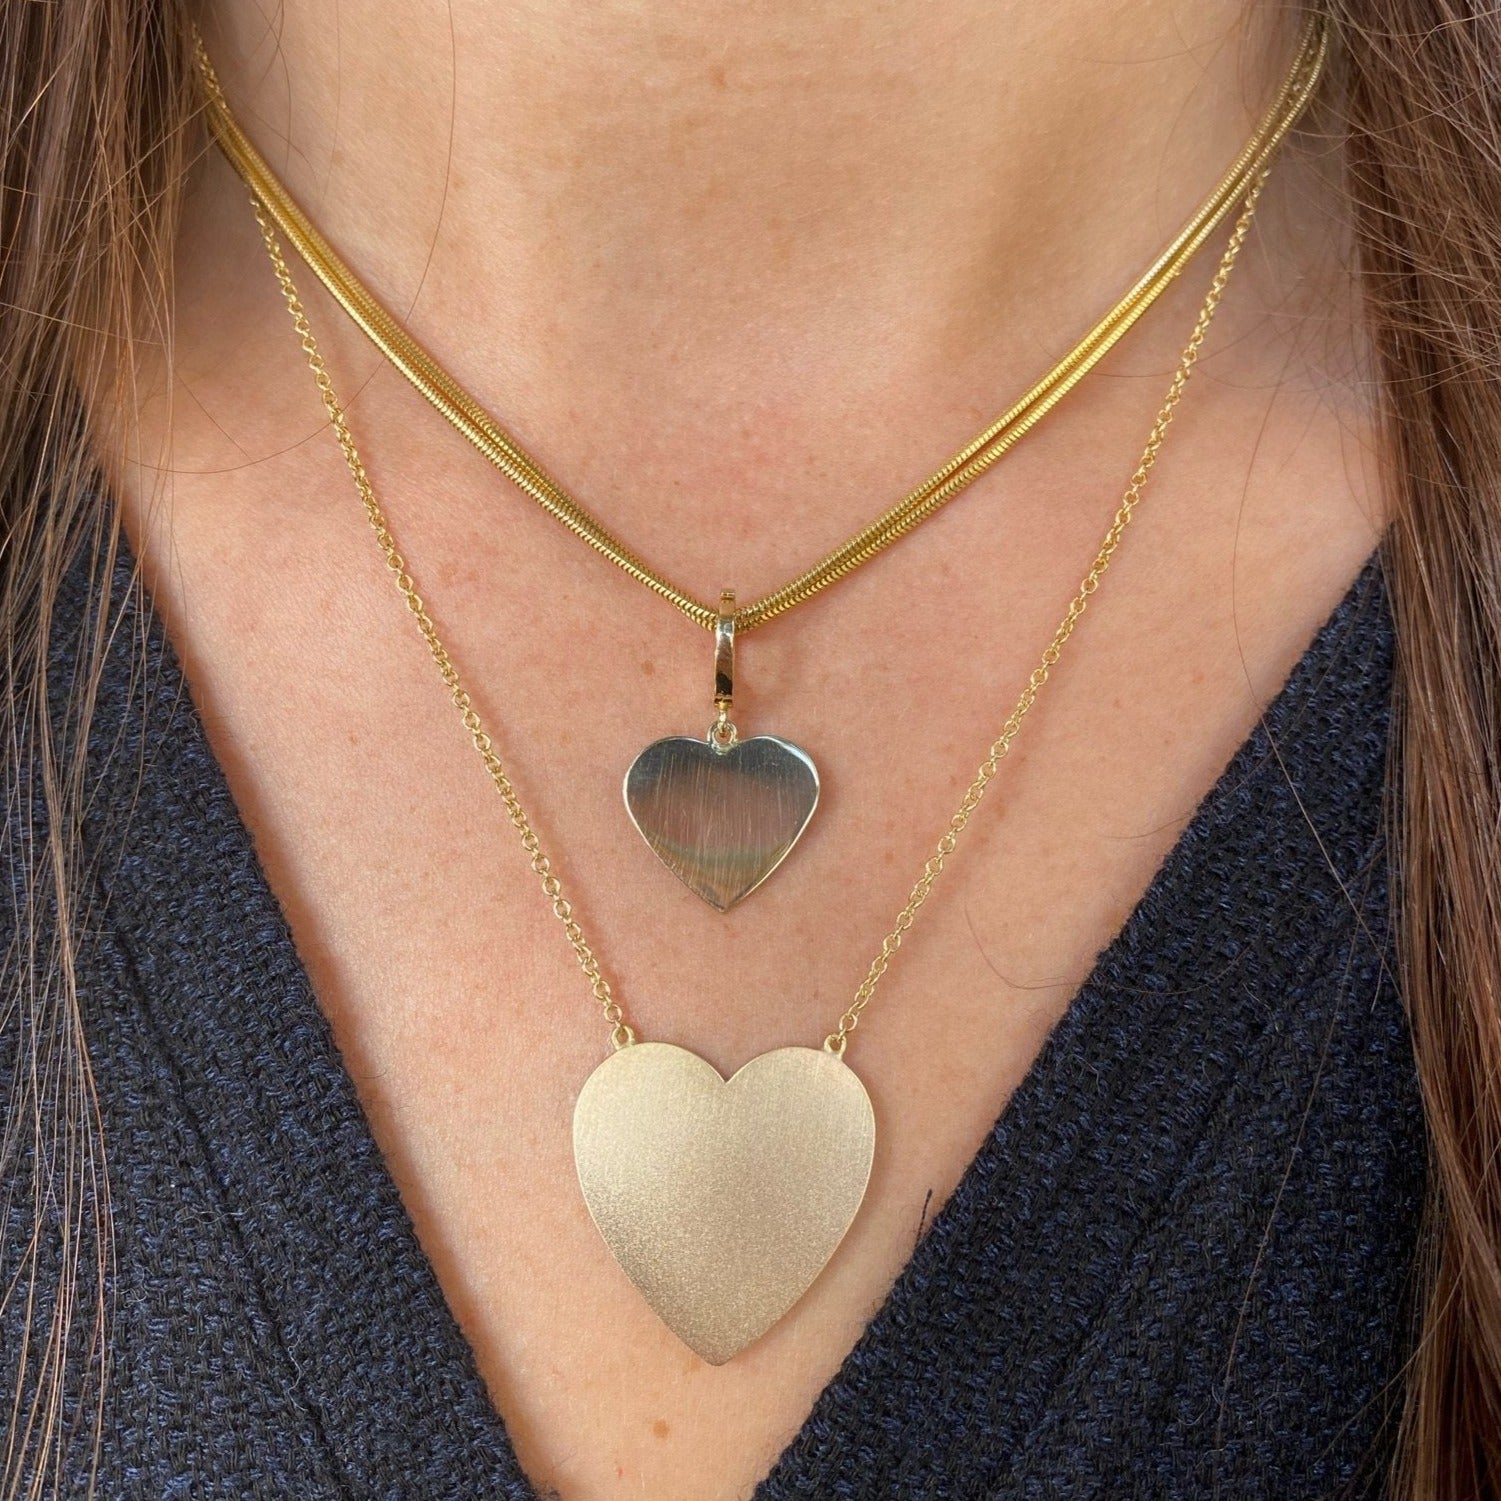 Size differences of Small Heart & Large Heartmsxsrj-solid-heart-charm-yellow-gold-shylee-rose-jewelry